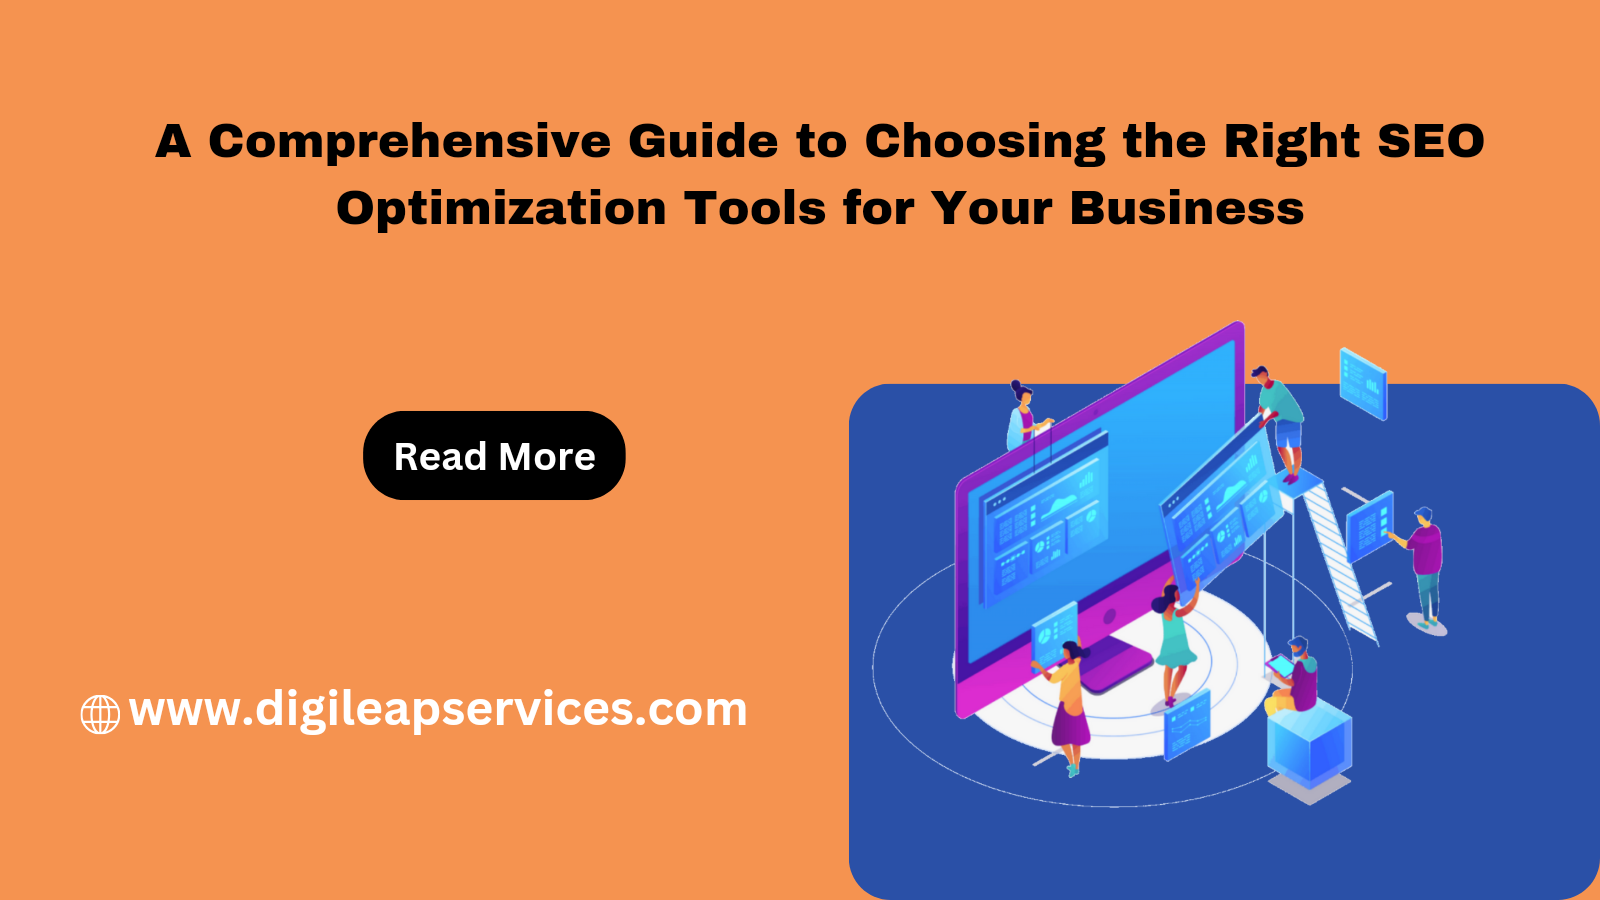 Right SEO Optimization tools for your business